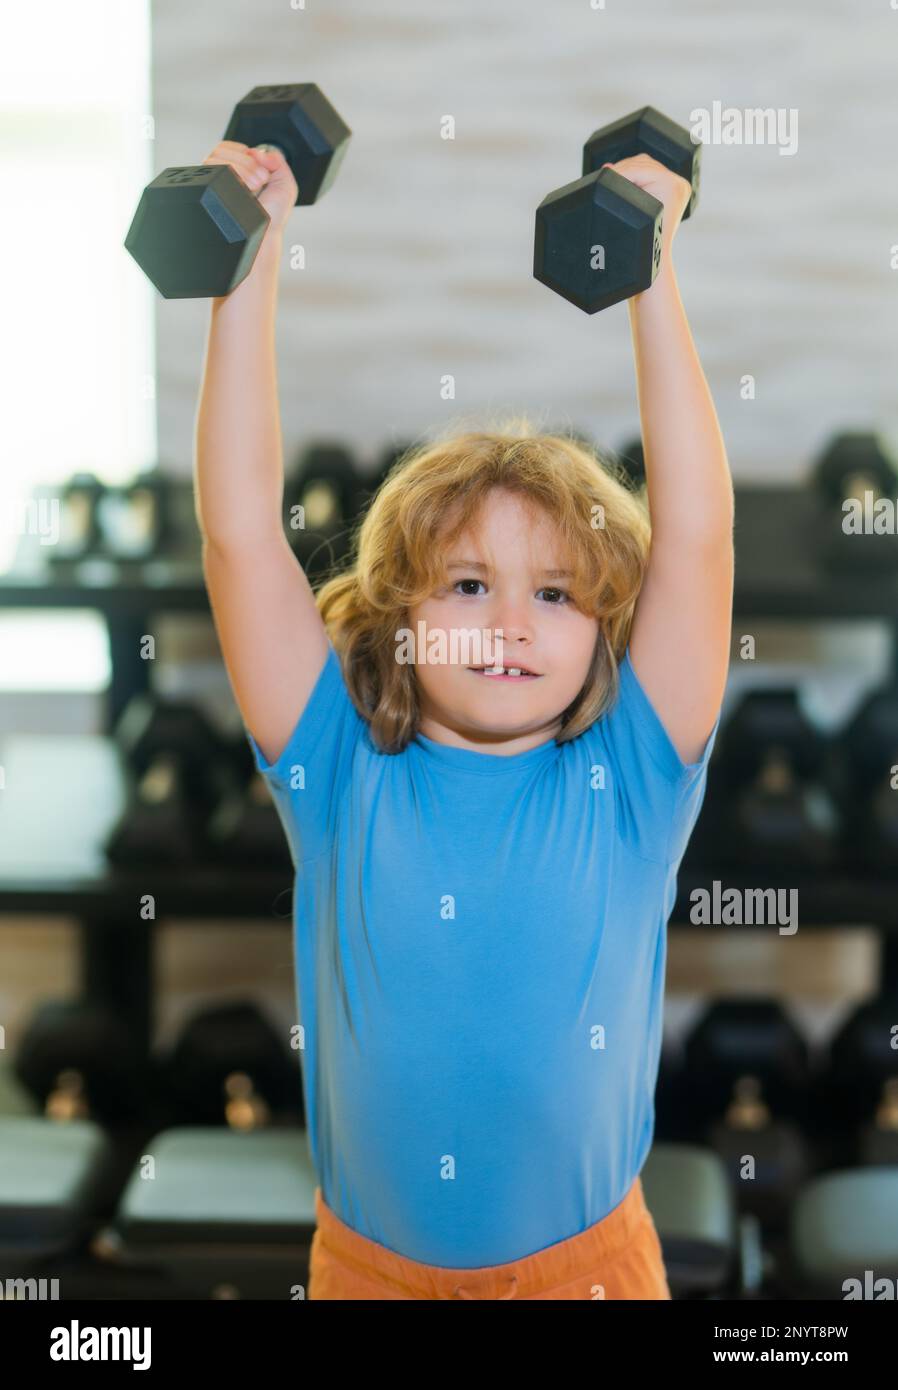 Child boy pumping up biceps muscles with dumbbell. Fitness kids with dumbbells Stock Photo